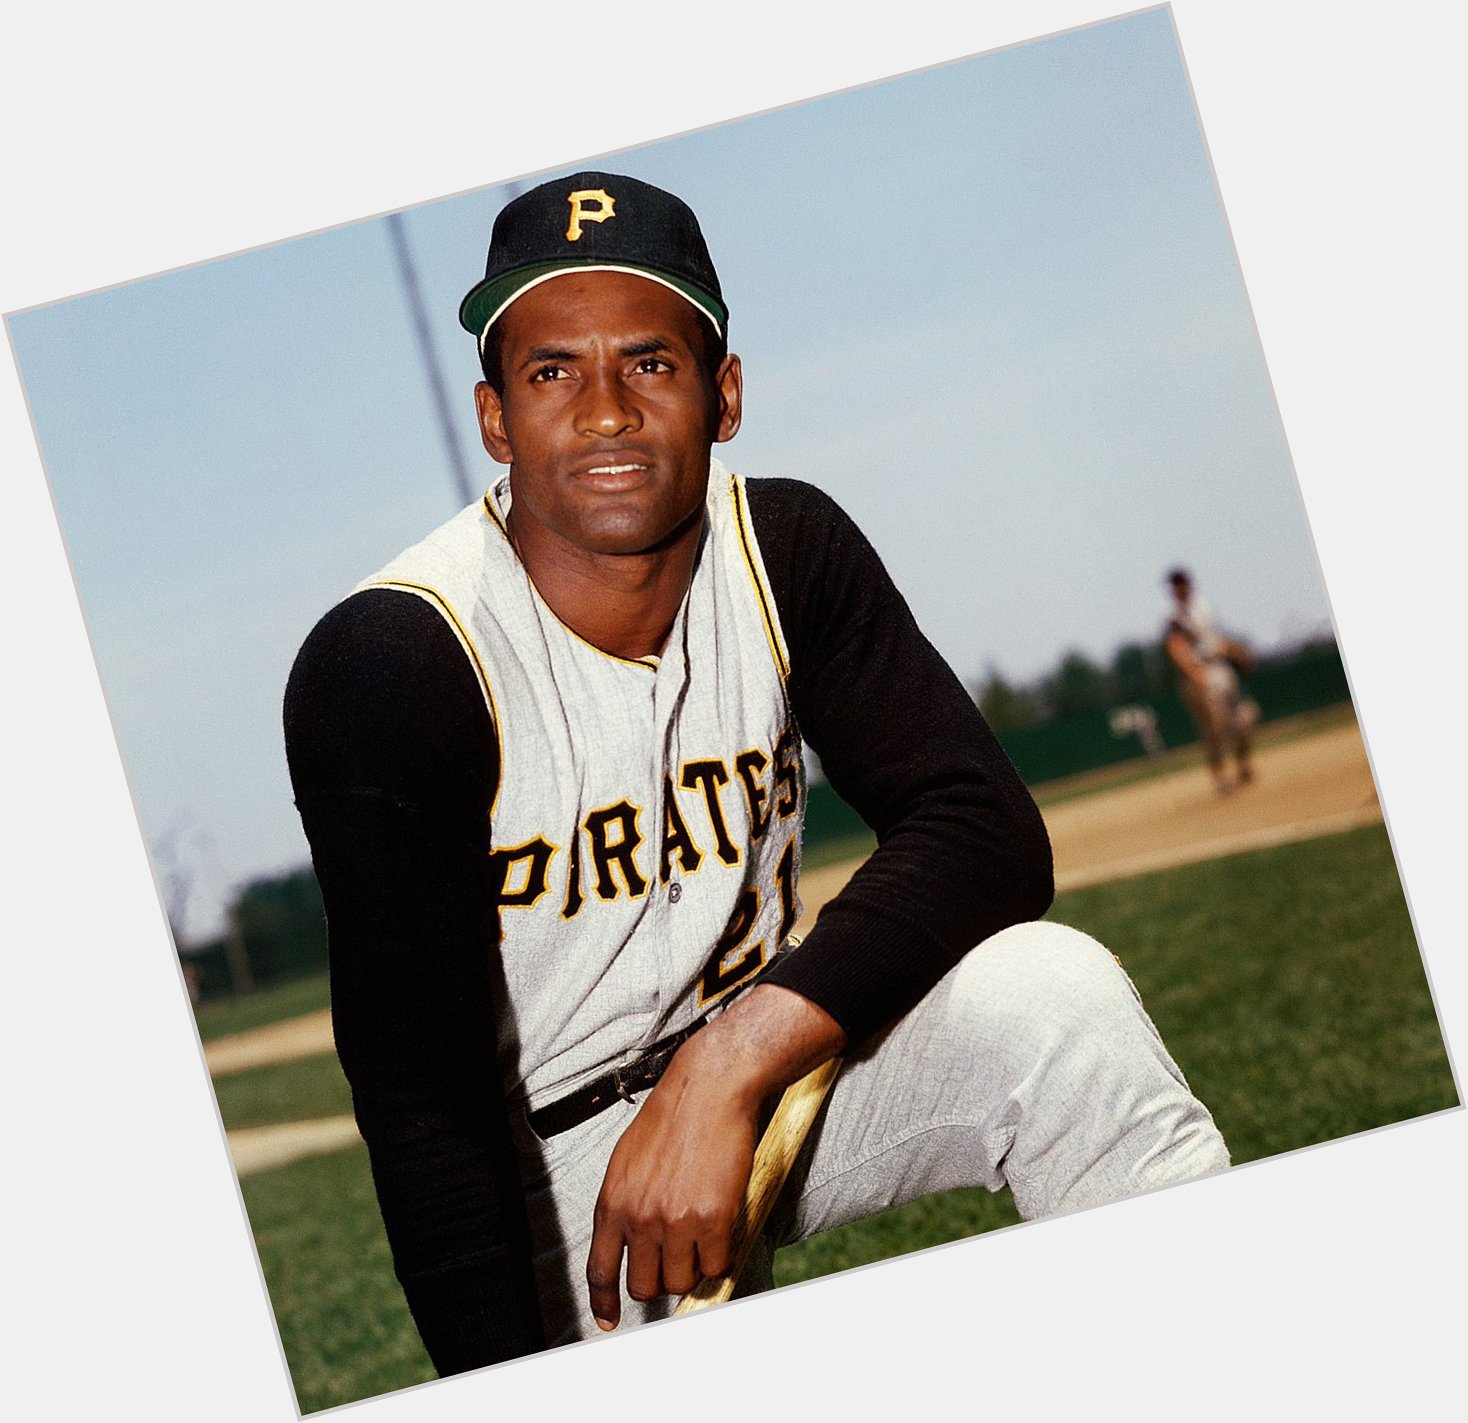 Happy Birthday! The great Roberto Clemente would have been 83 today. 